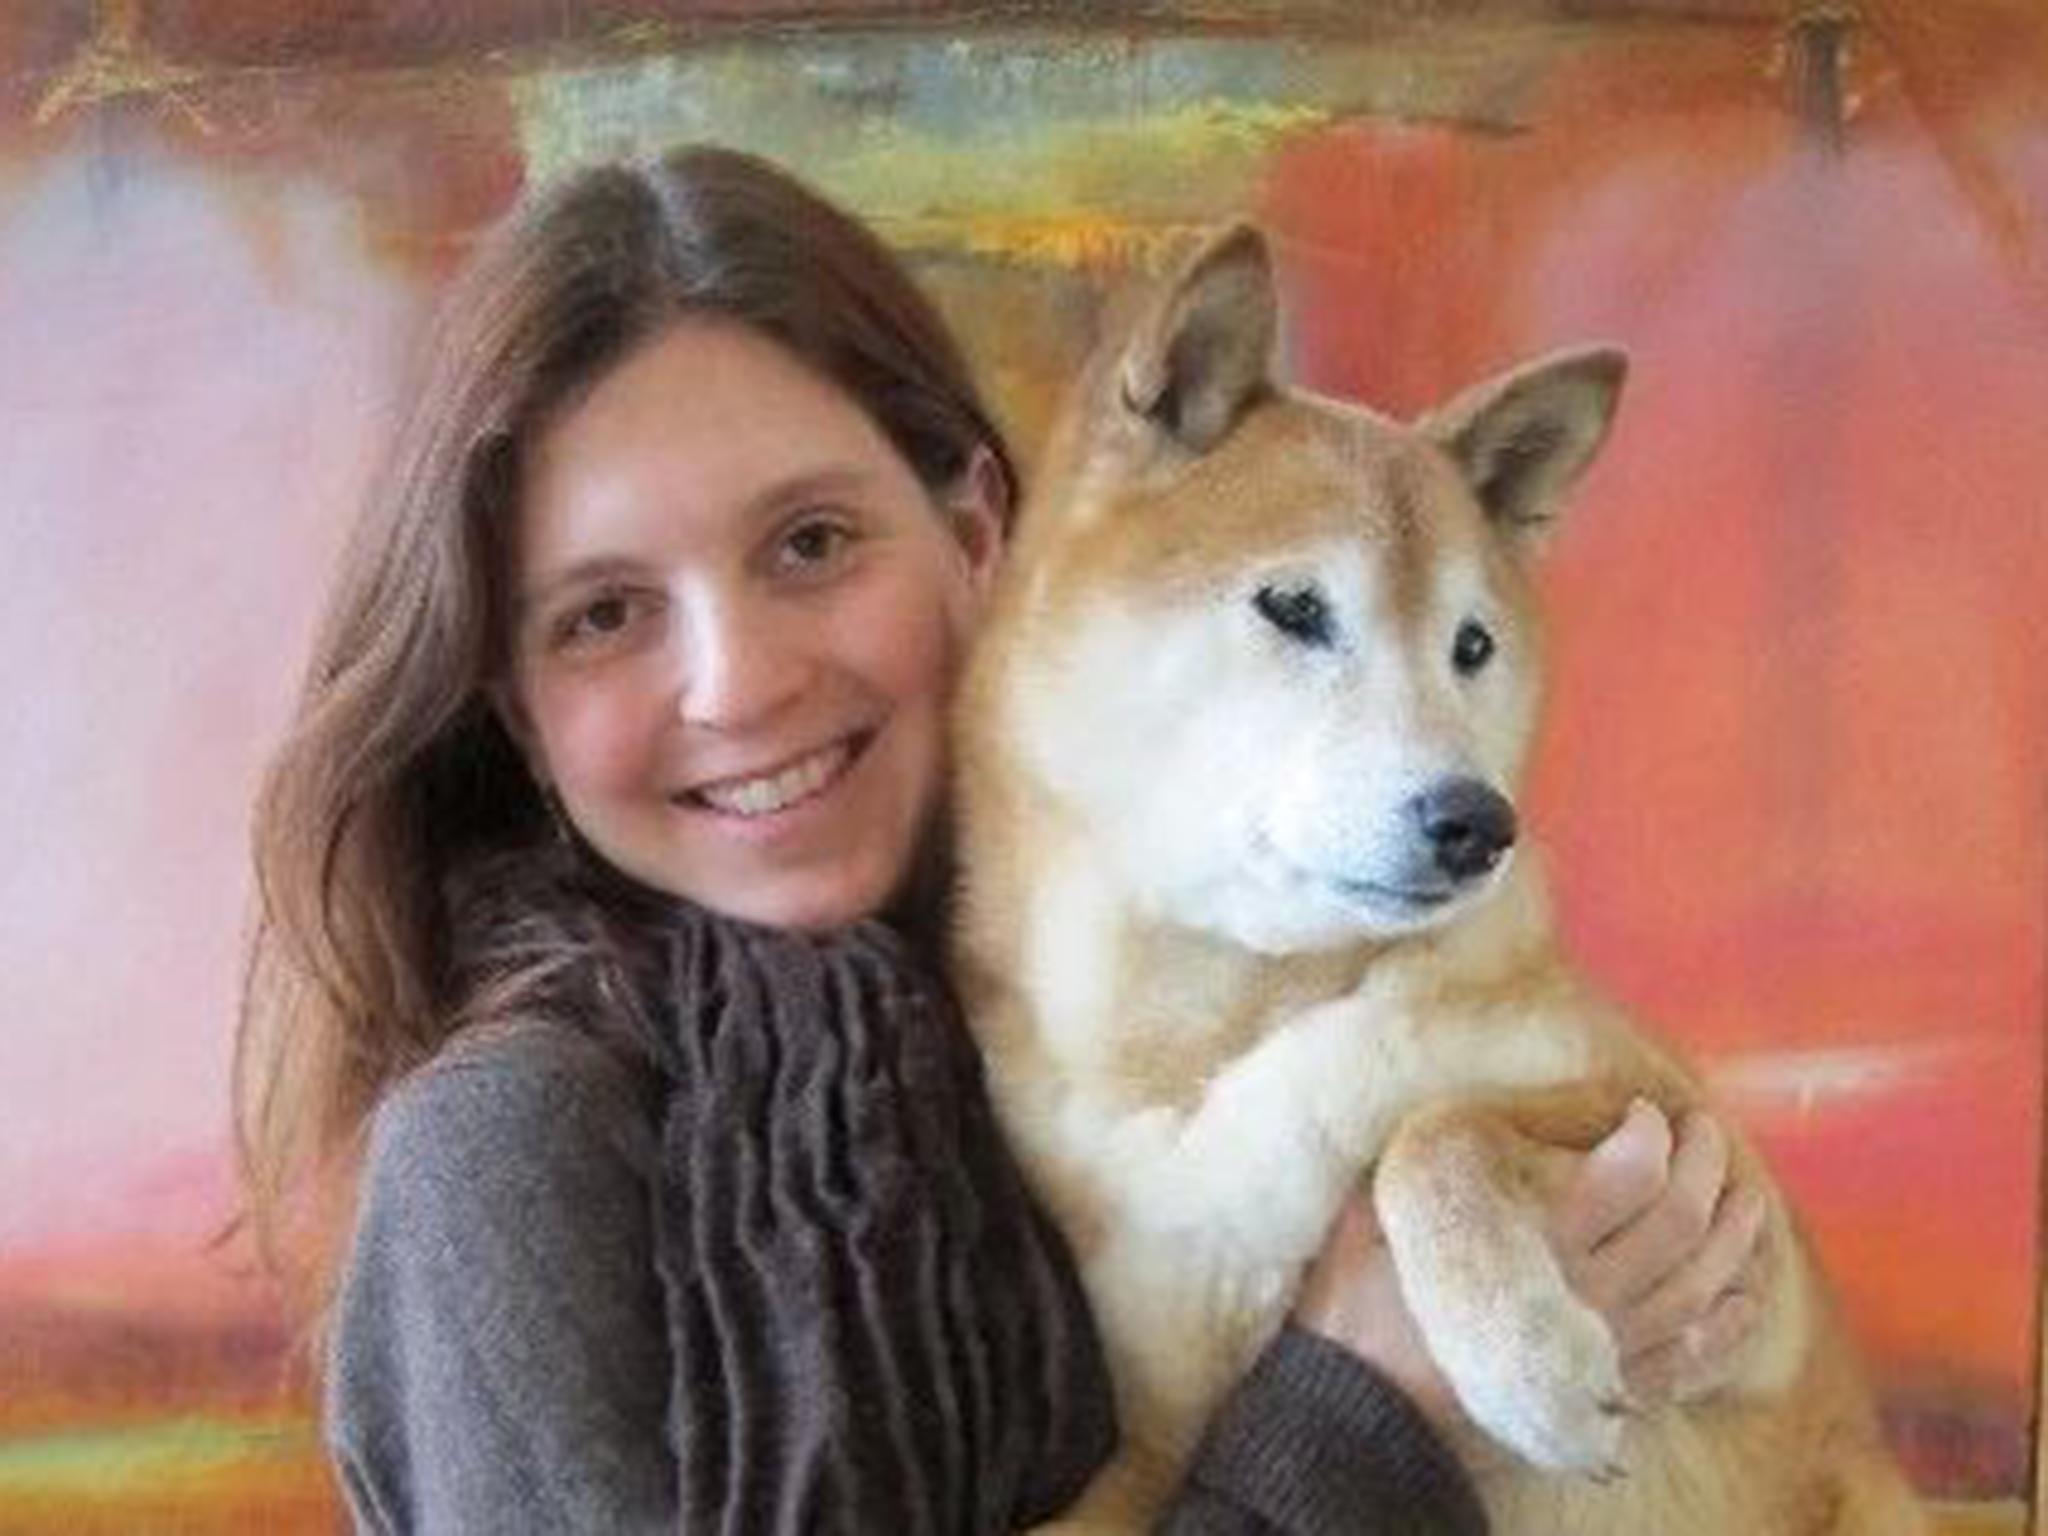 Author Jennifer S Howard with her dog Tai which once saved a chameleon's life